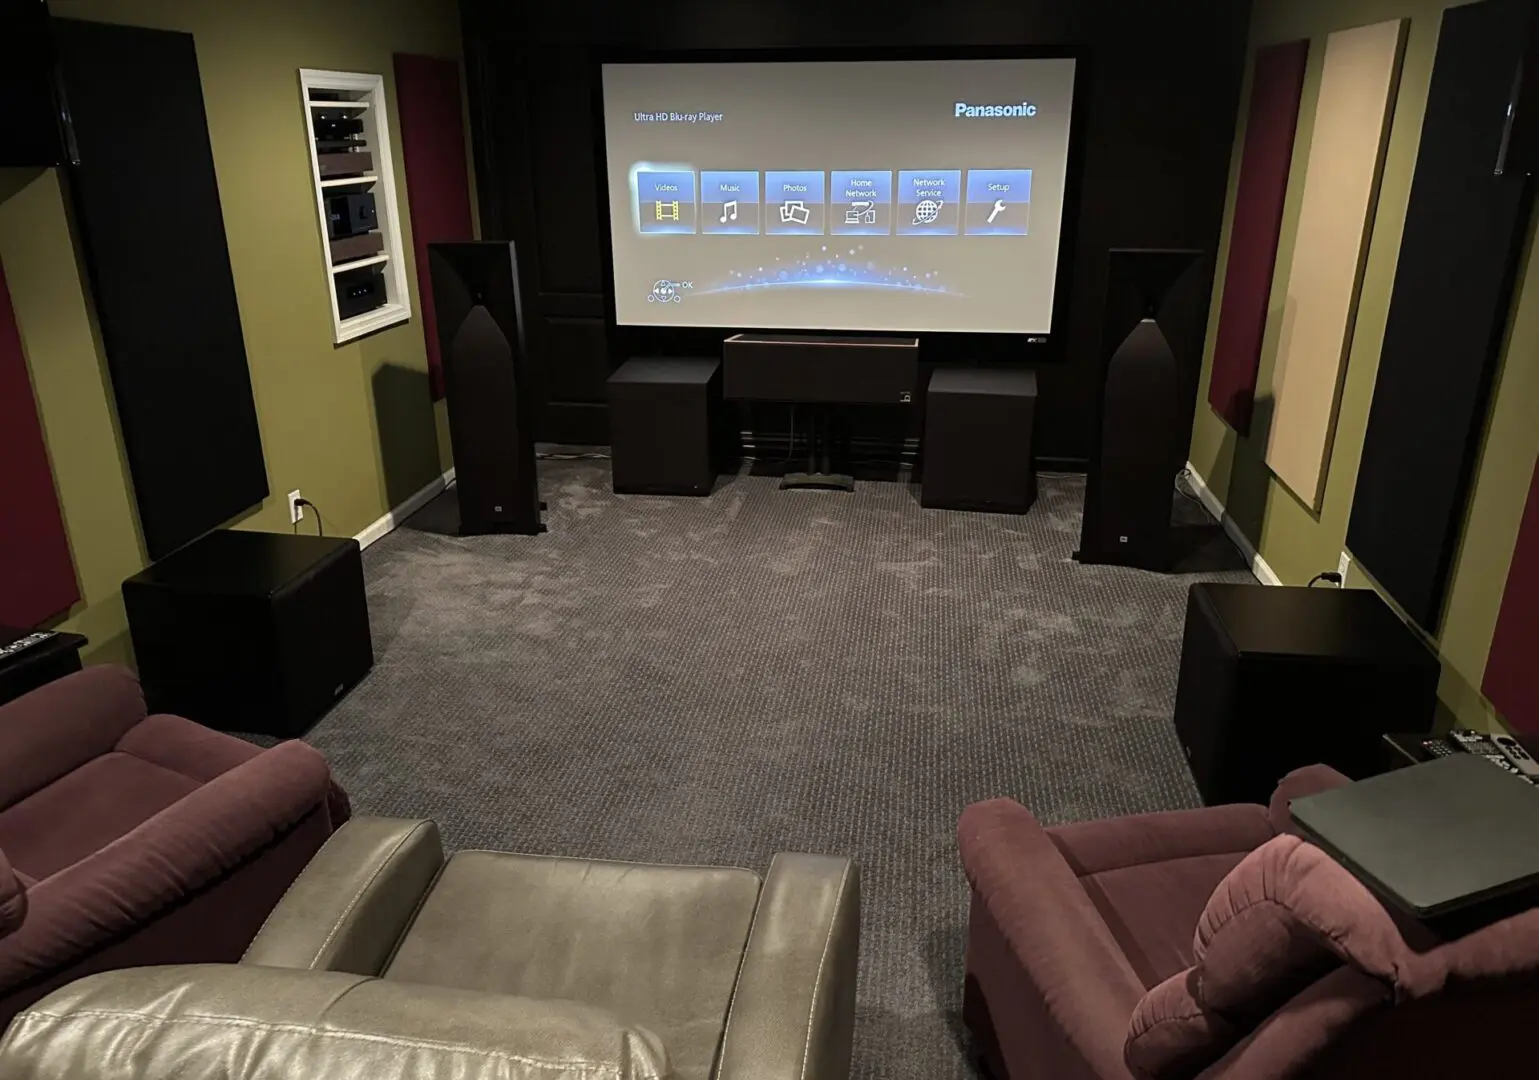 The Sound Station in Bartlesville client's Theater System